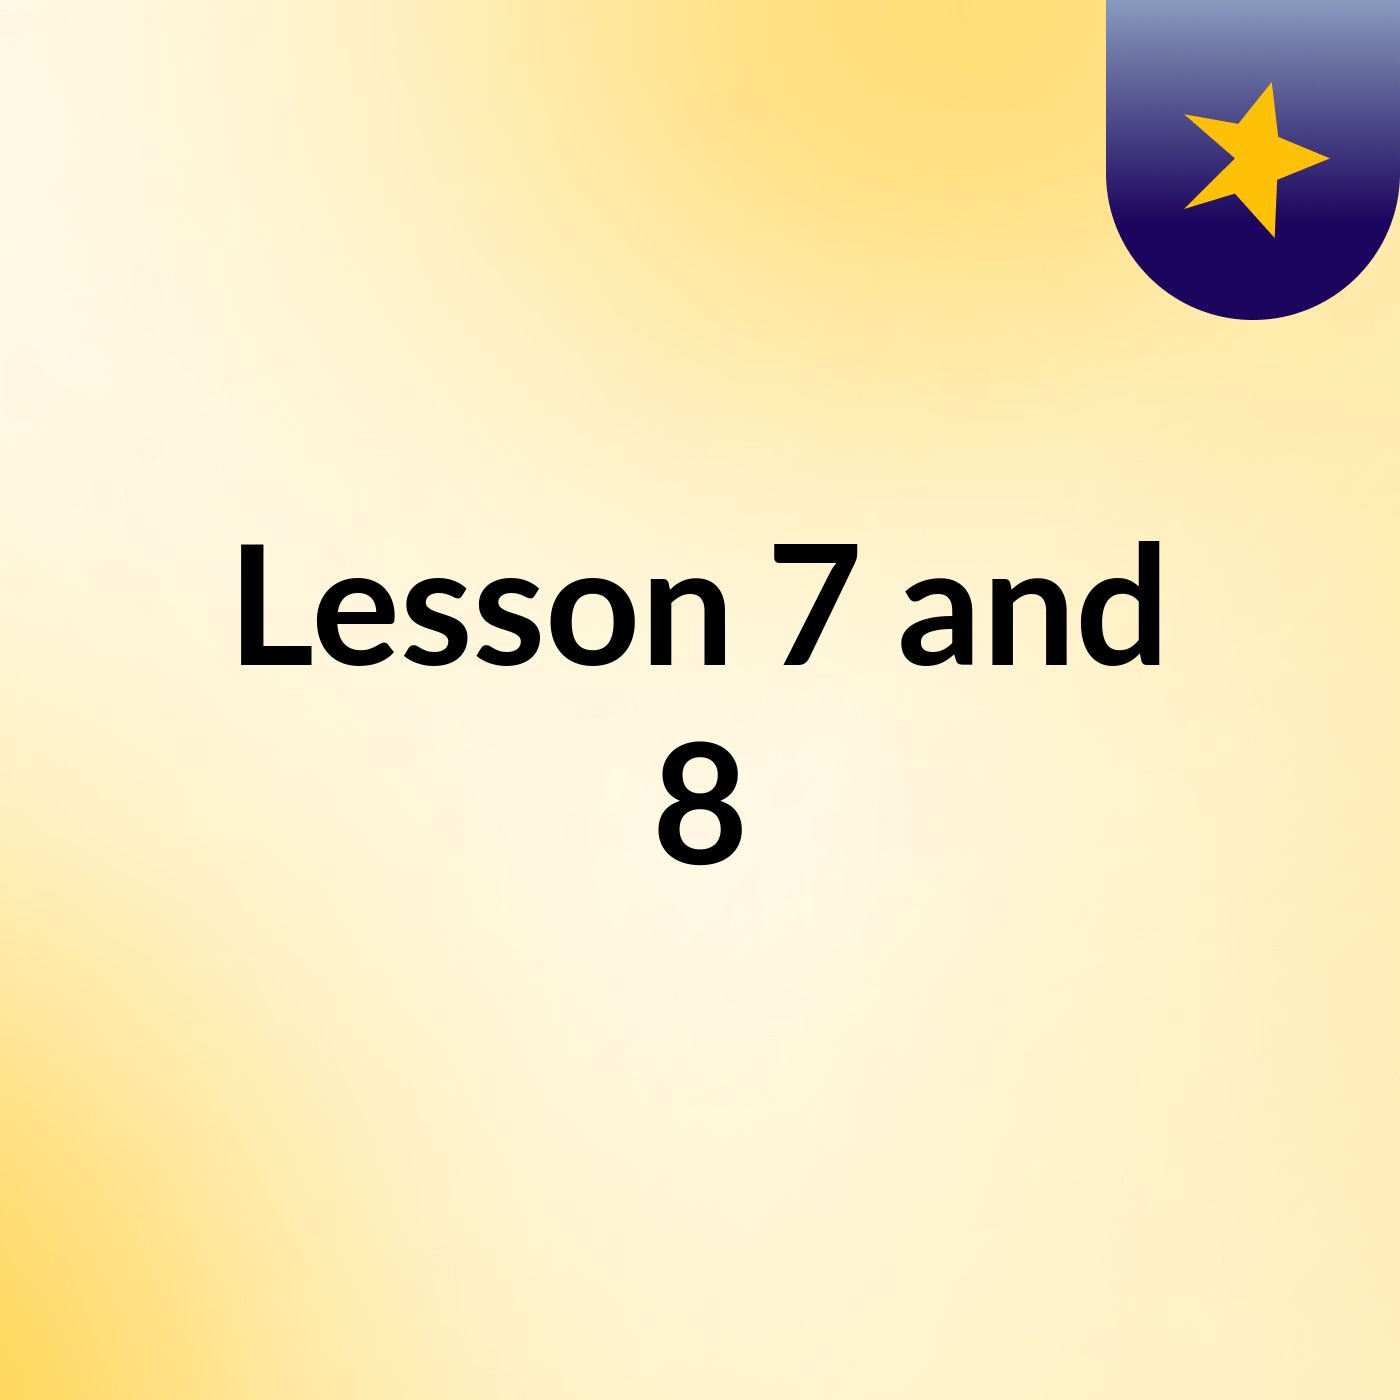 Lesson 7 and 8